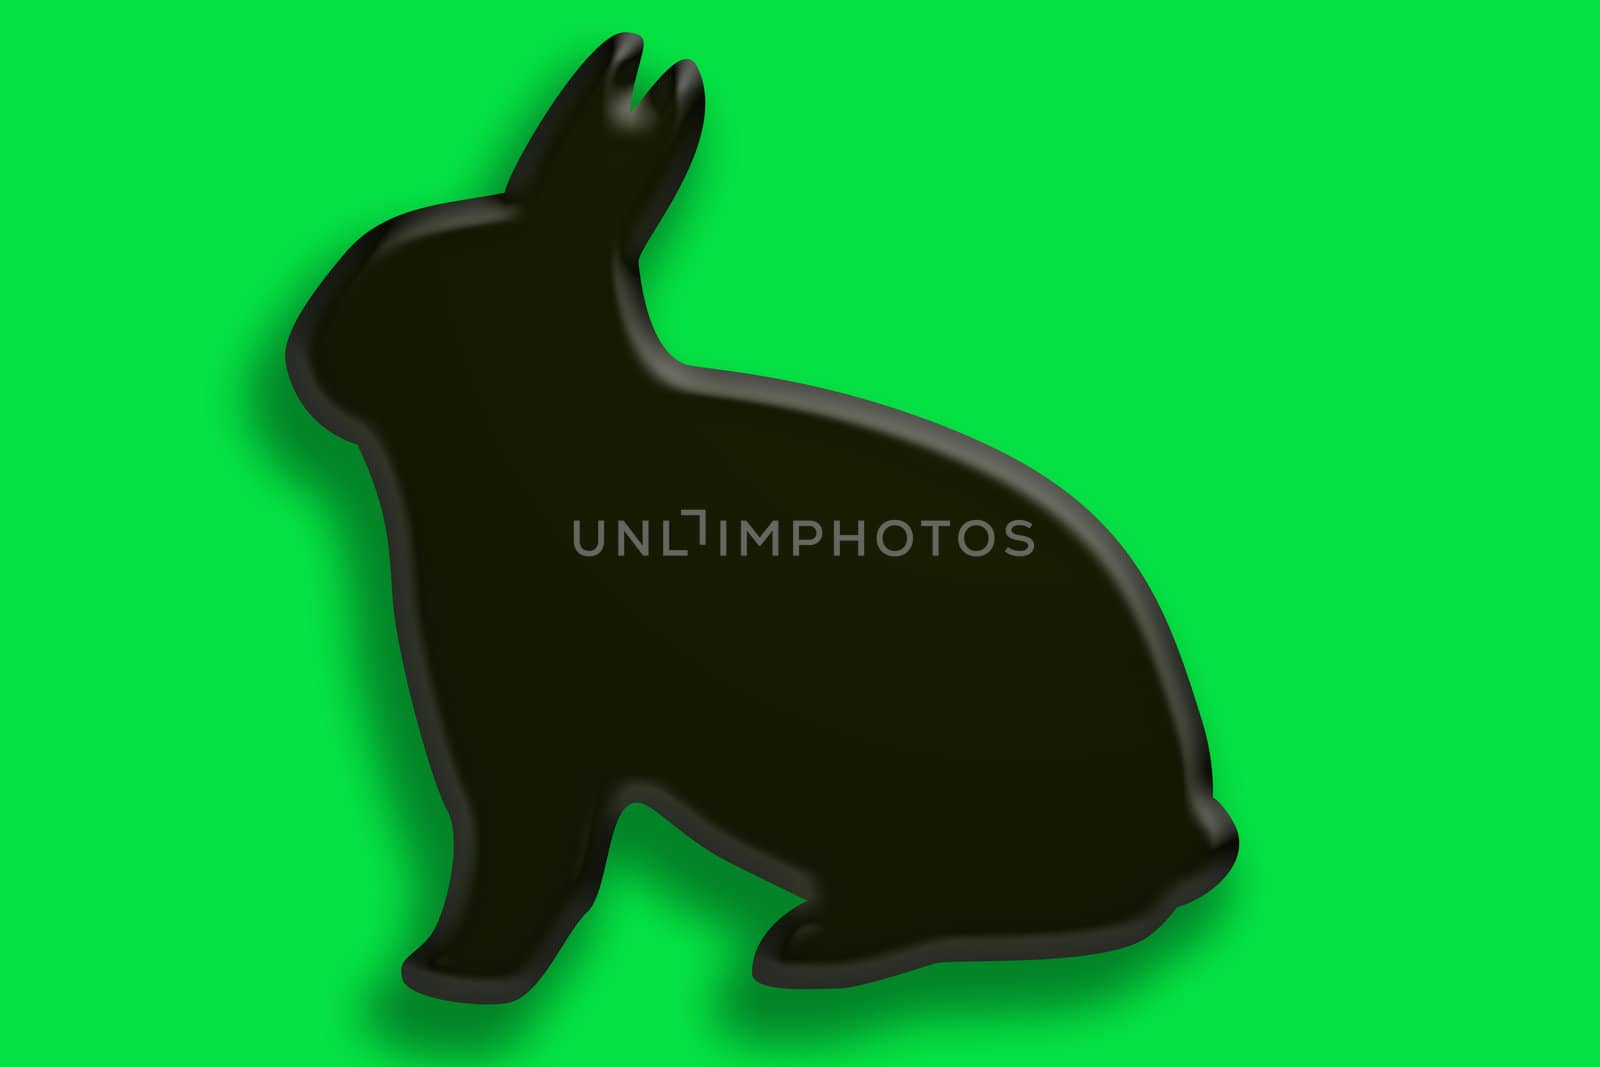 hare on green background